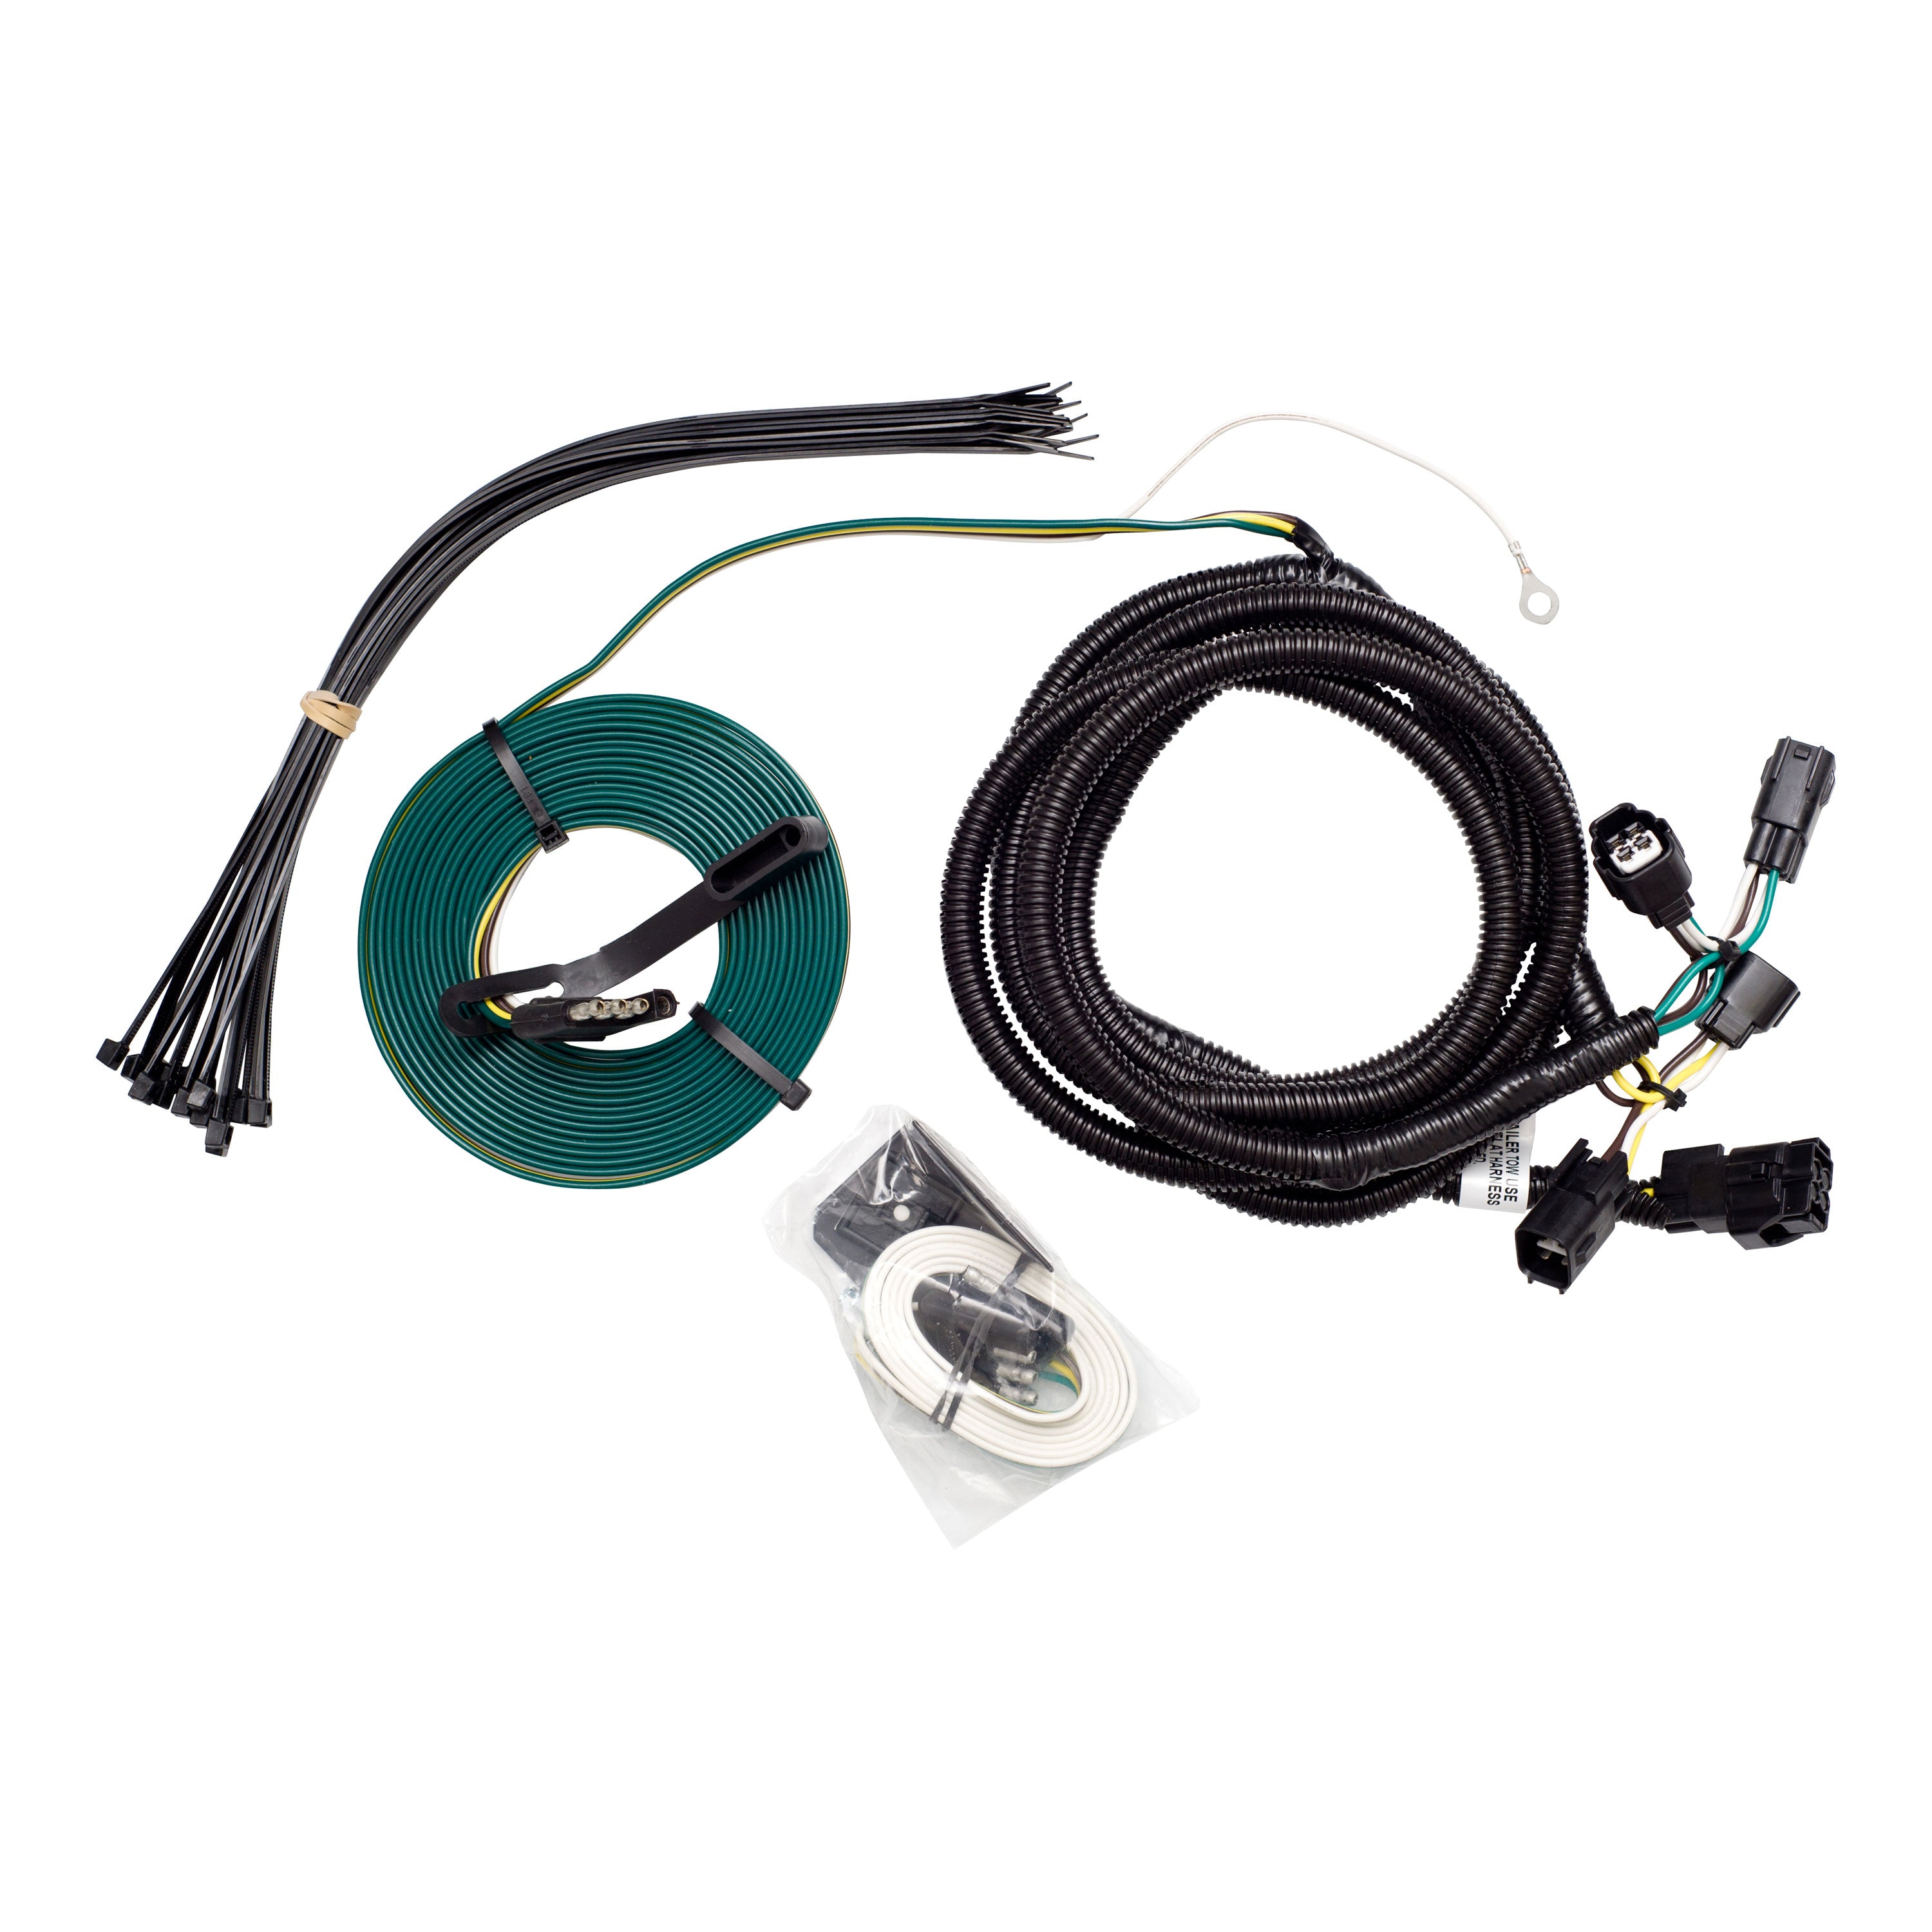 Demco 9523147 Towed Connector Vehicle Wiring Kit for Honda Fit '09-'13